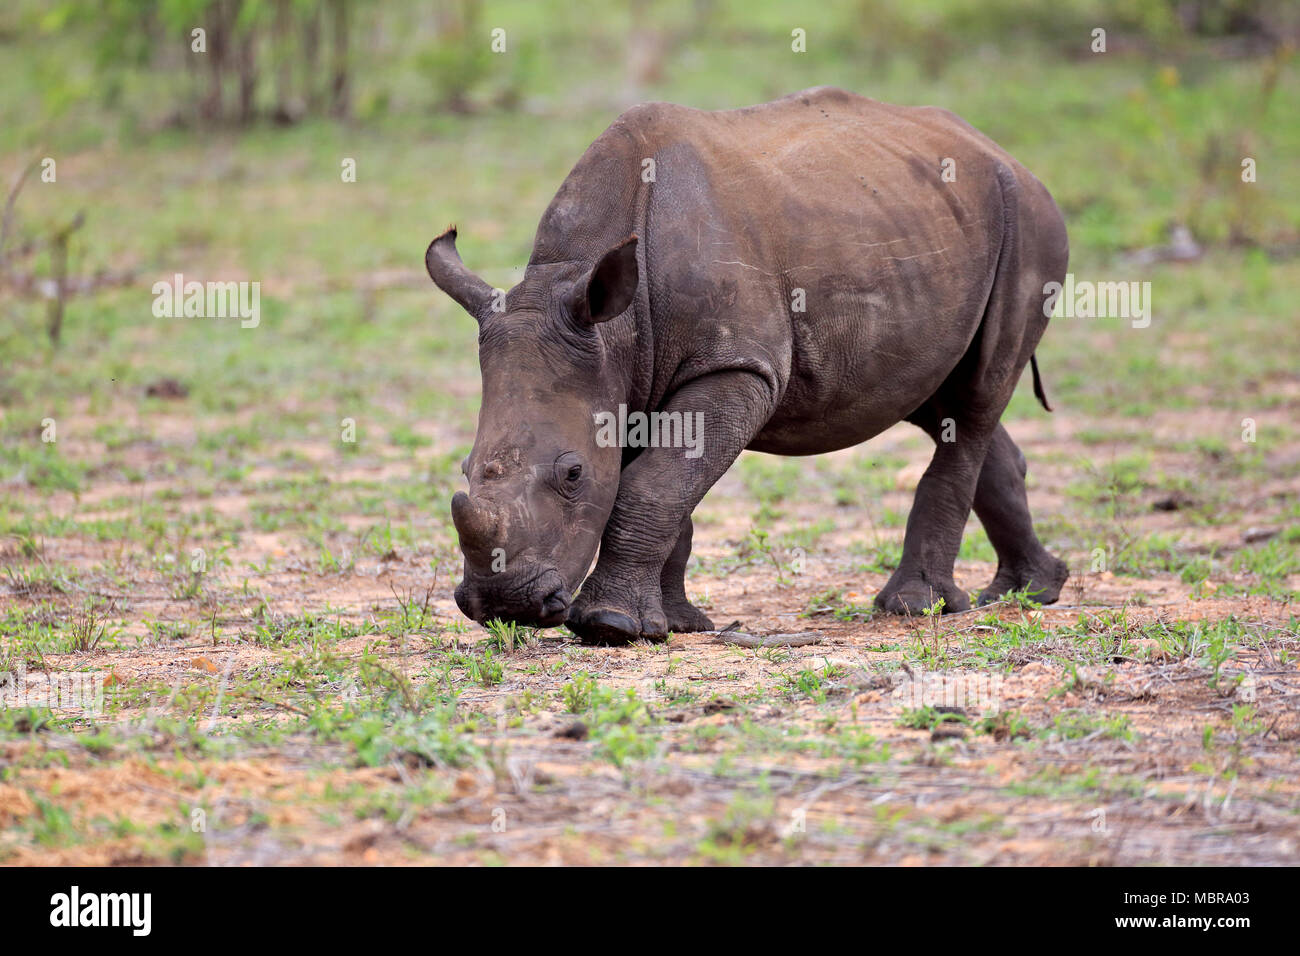 White rhinoceros (Ceratotherium simum), half adult young animal, walking, foraging, pachyderm, Kruger National Park Stock Photo